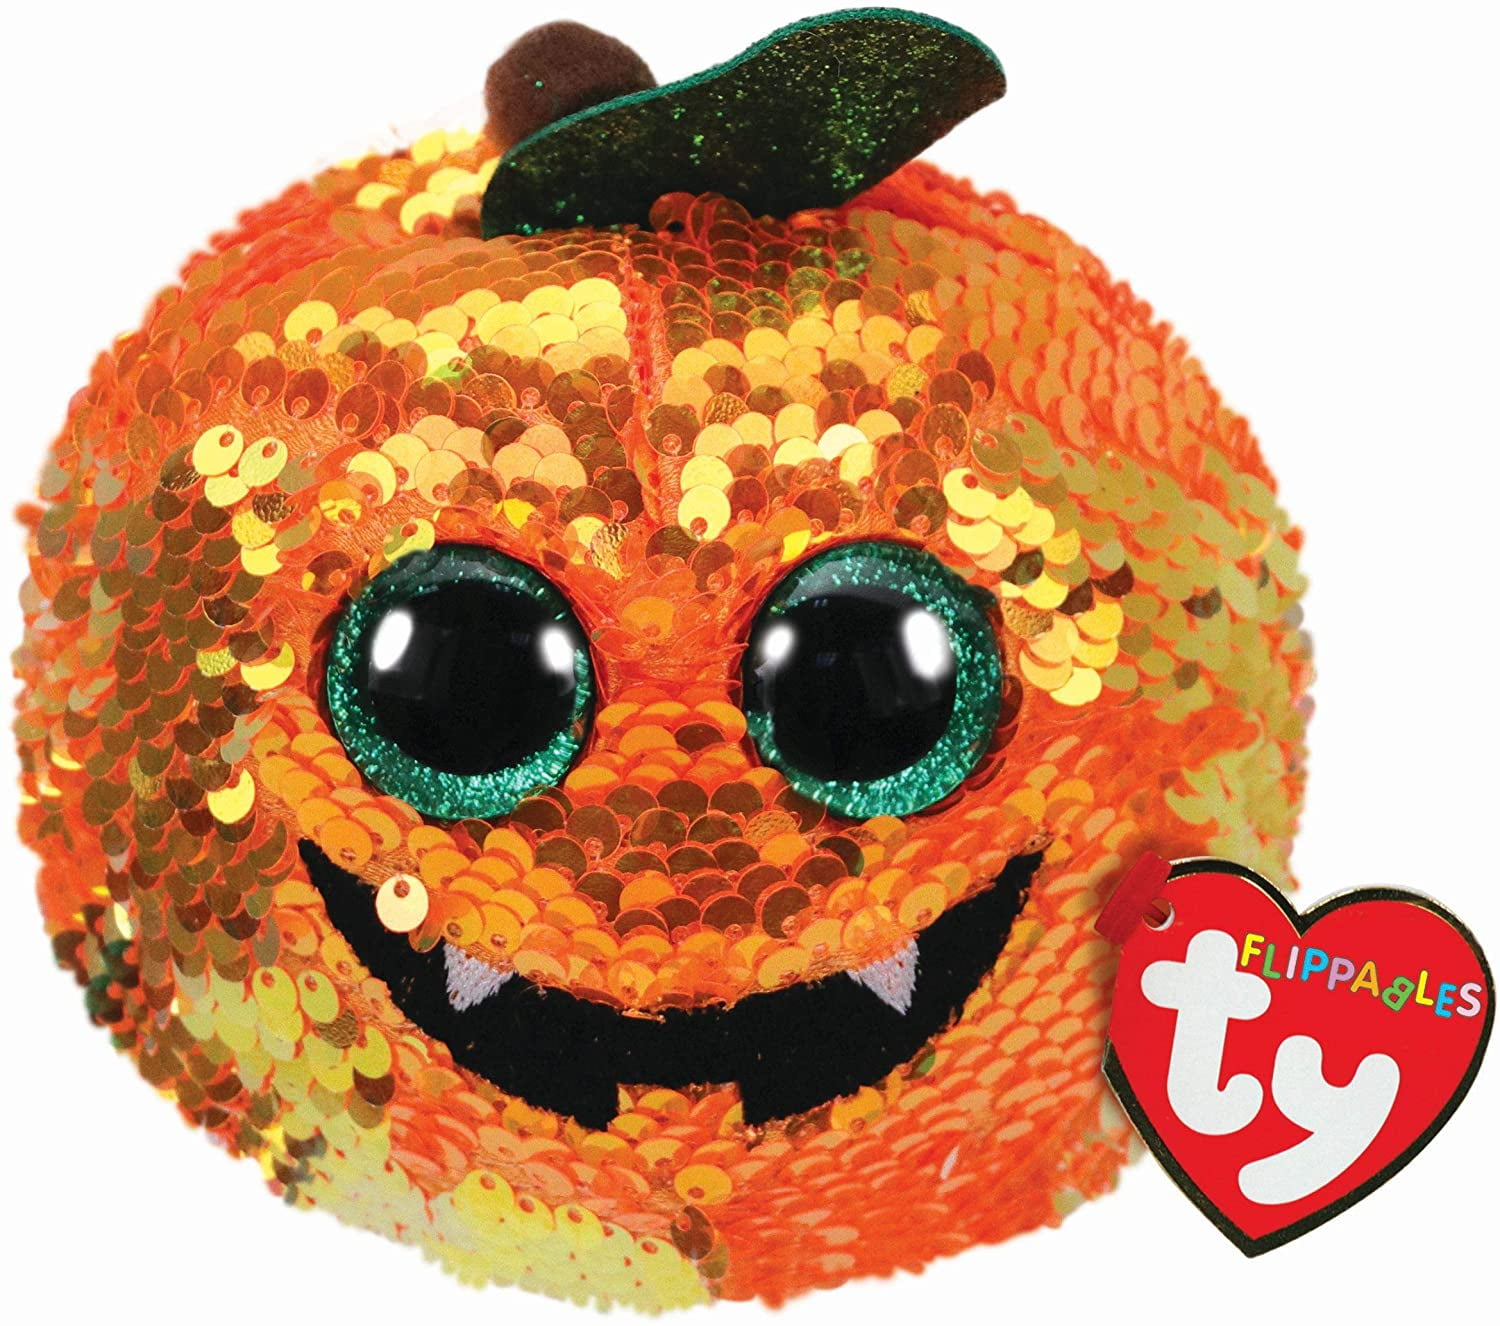 6 inch TY Flippables Sequin Plush - MWMTs Boo Toy SEEDS the Pumpkin 